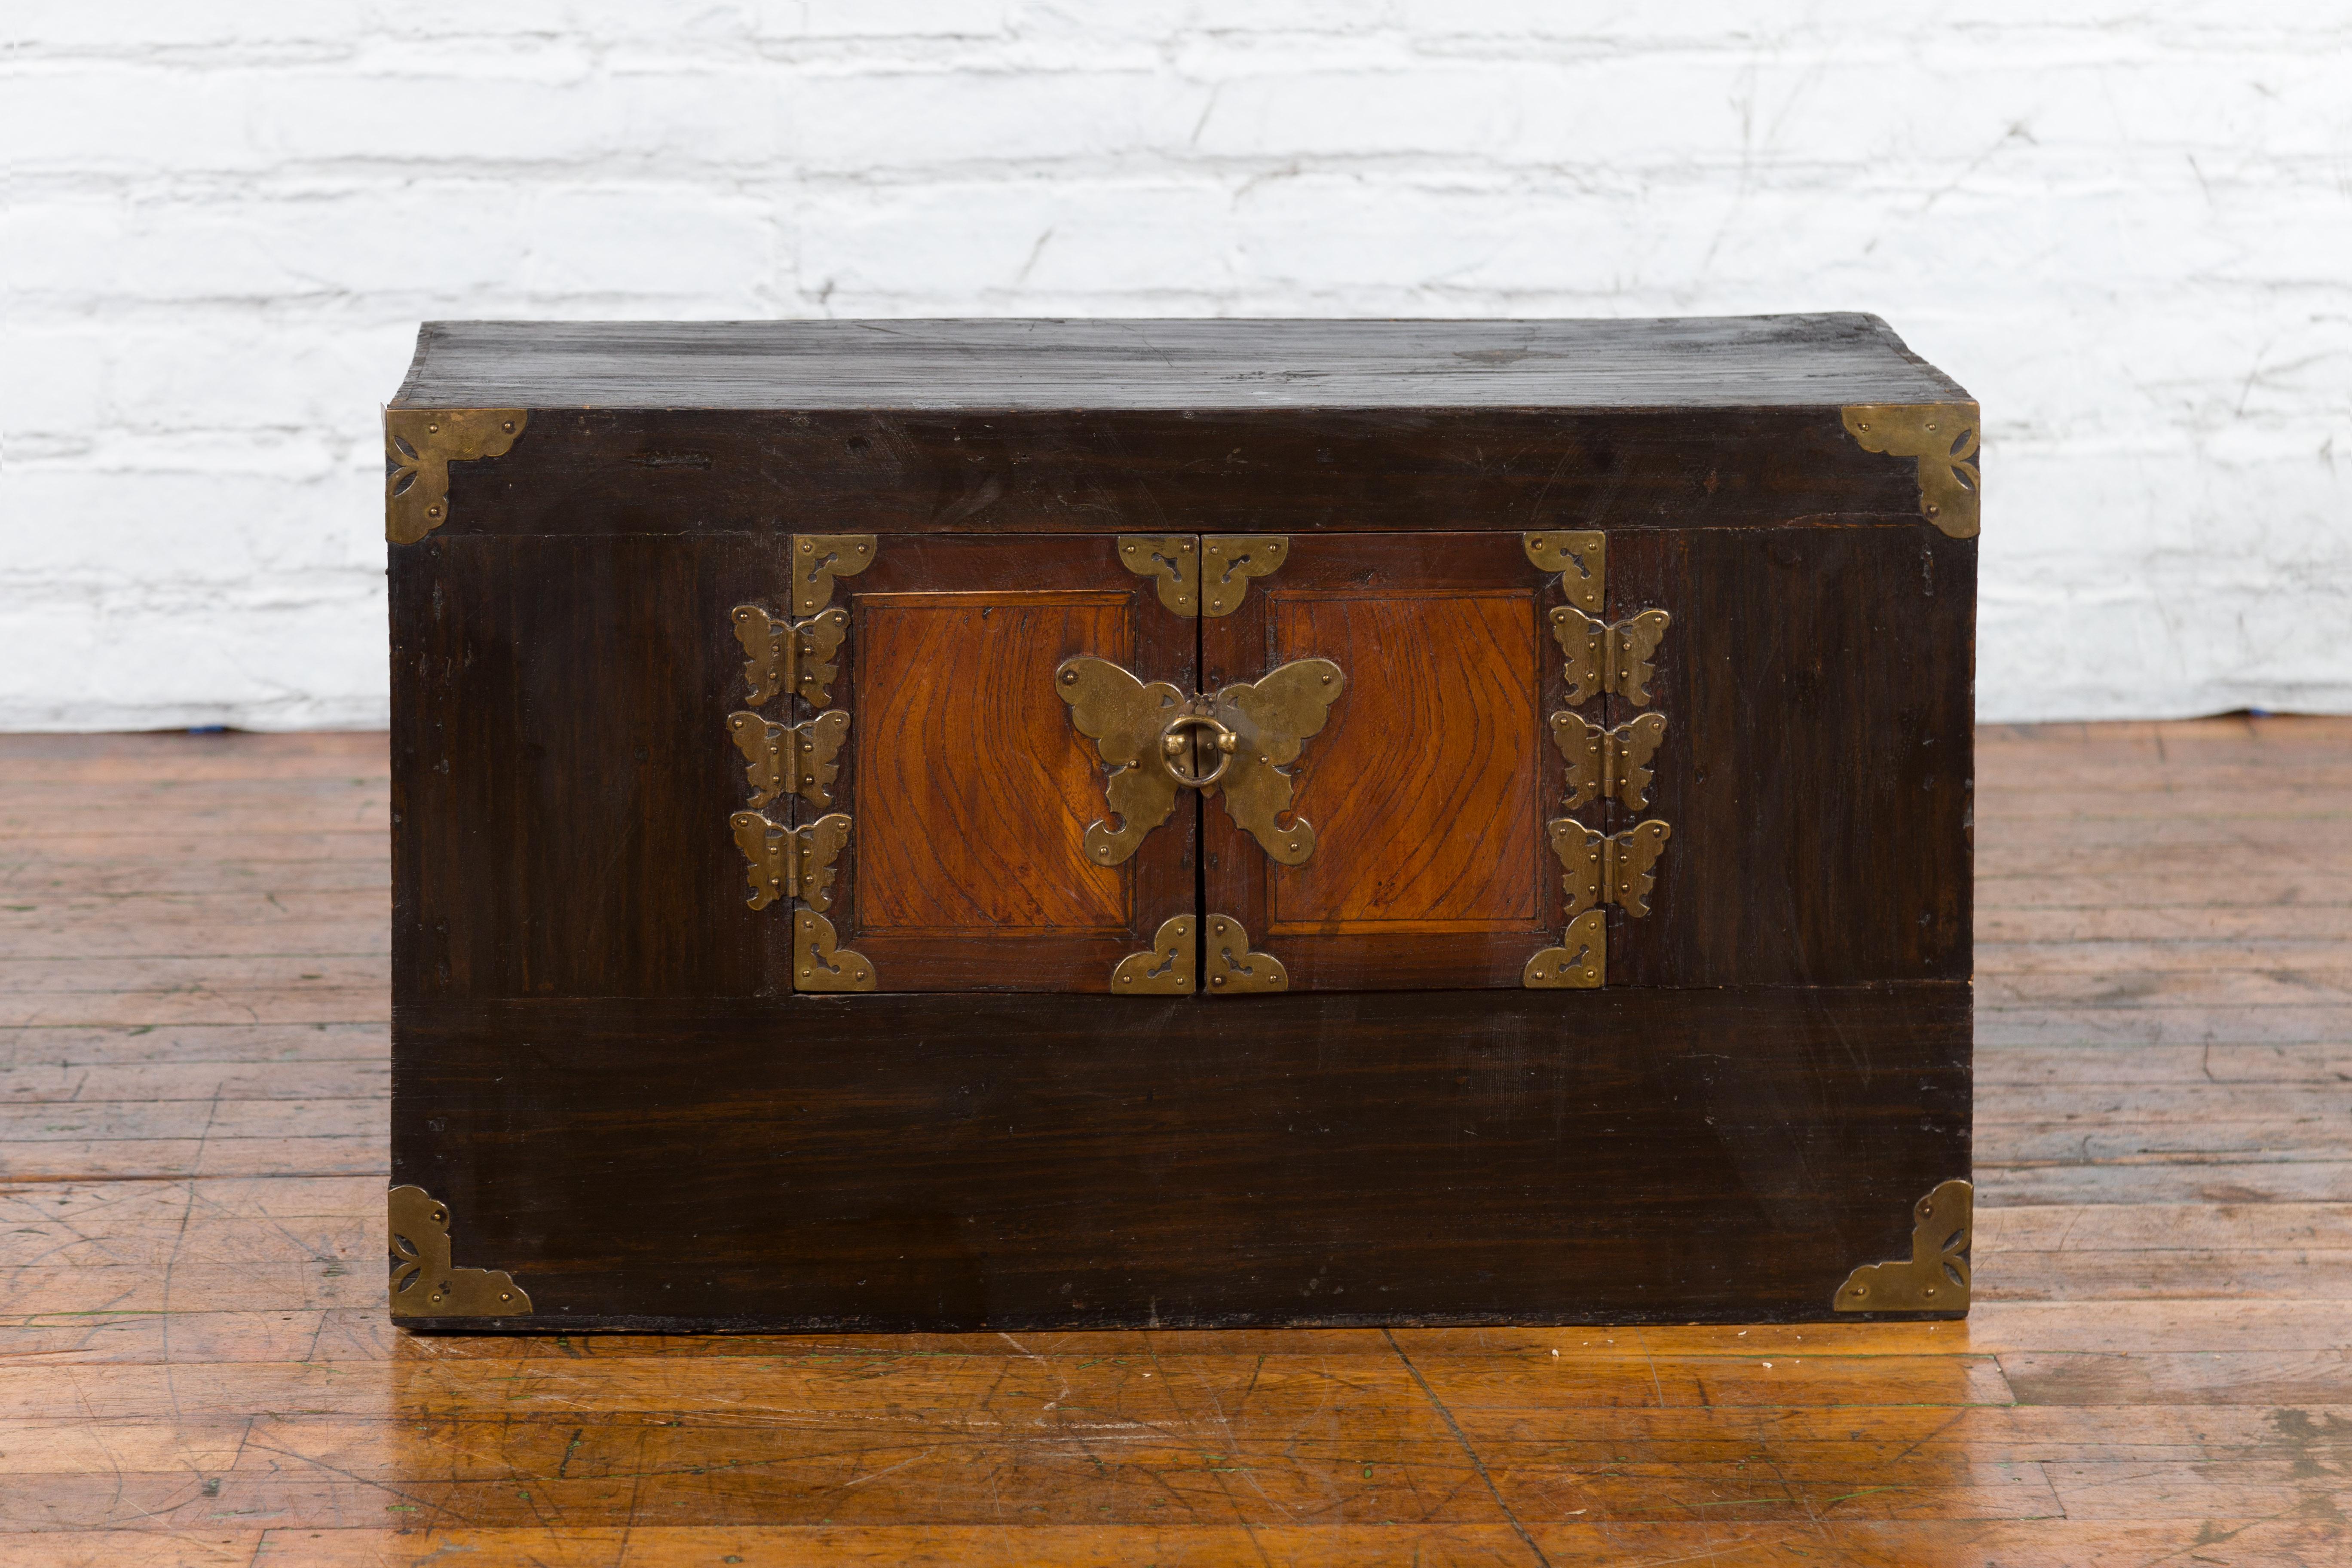 A Korean two-toned side chest from the late 19th century, with double doors and brass butterfly-shaped hardware. Created in Korea during the later years of the 19th century, this small cabinet features a rectangular top sitting above a two-toned